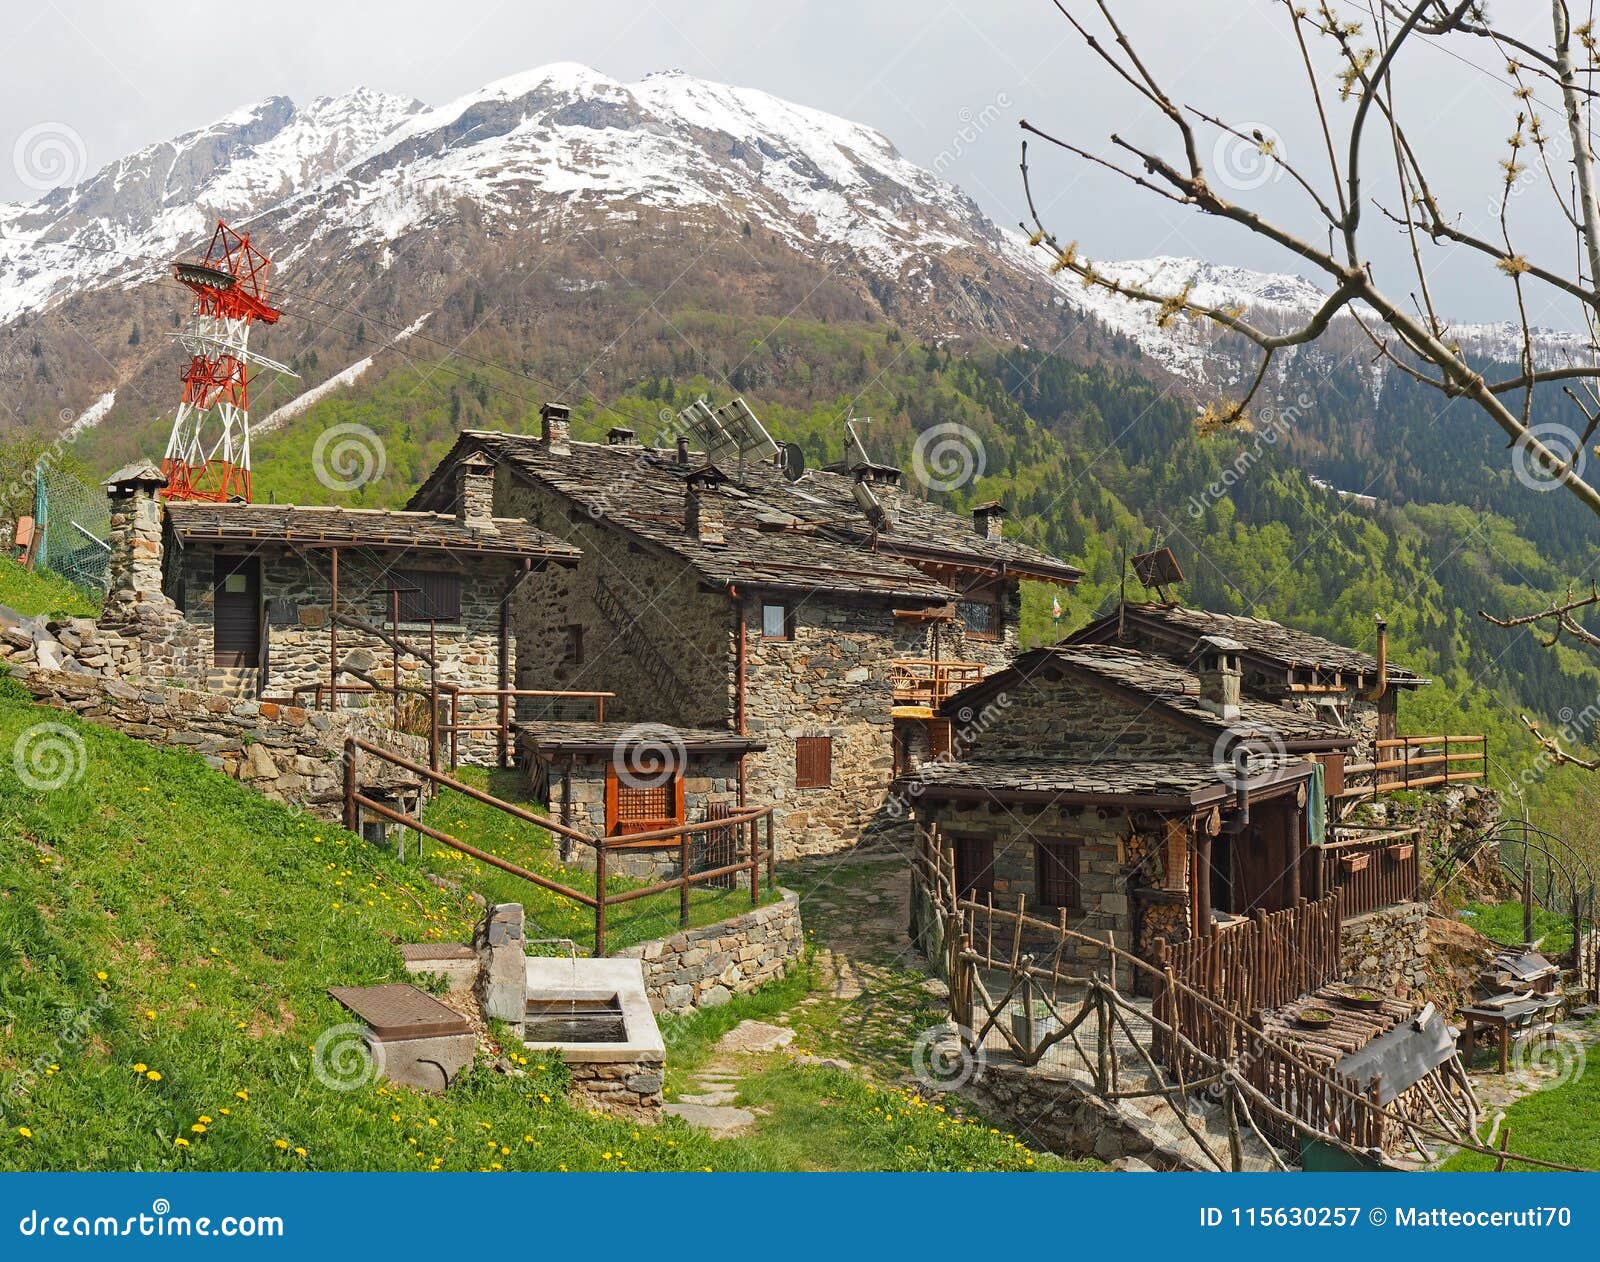 maslana is an ancient rural village accessible only on foot. valbondione, bergamo, orobie alps, italy